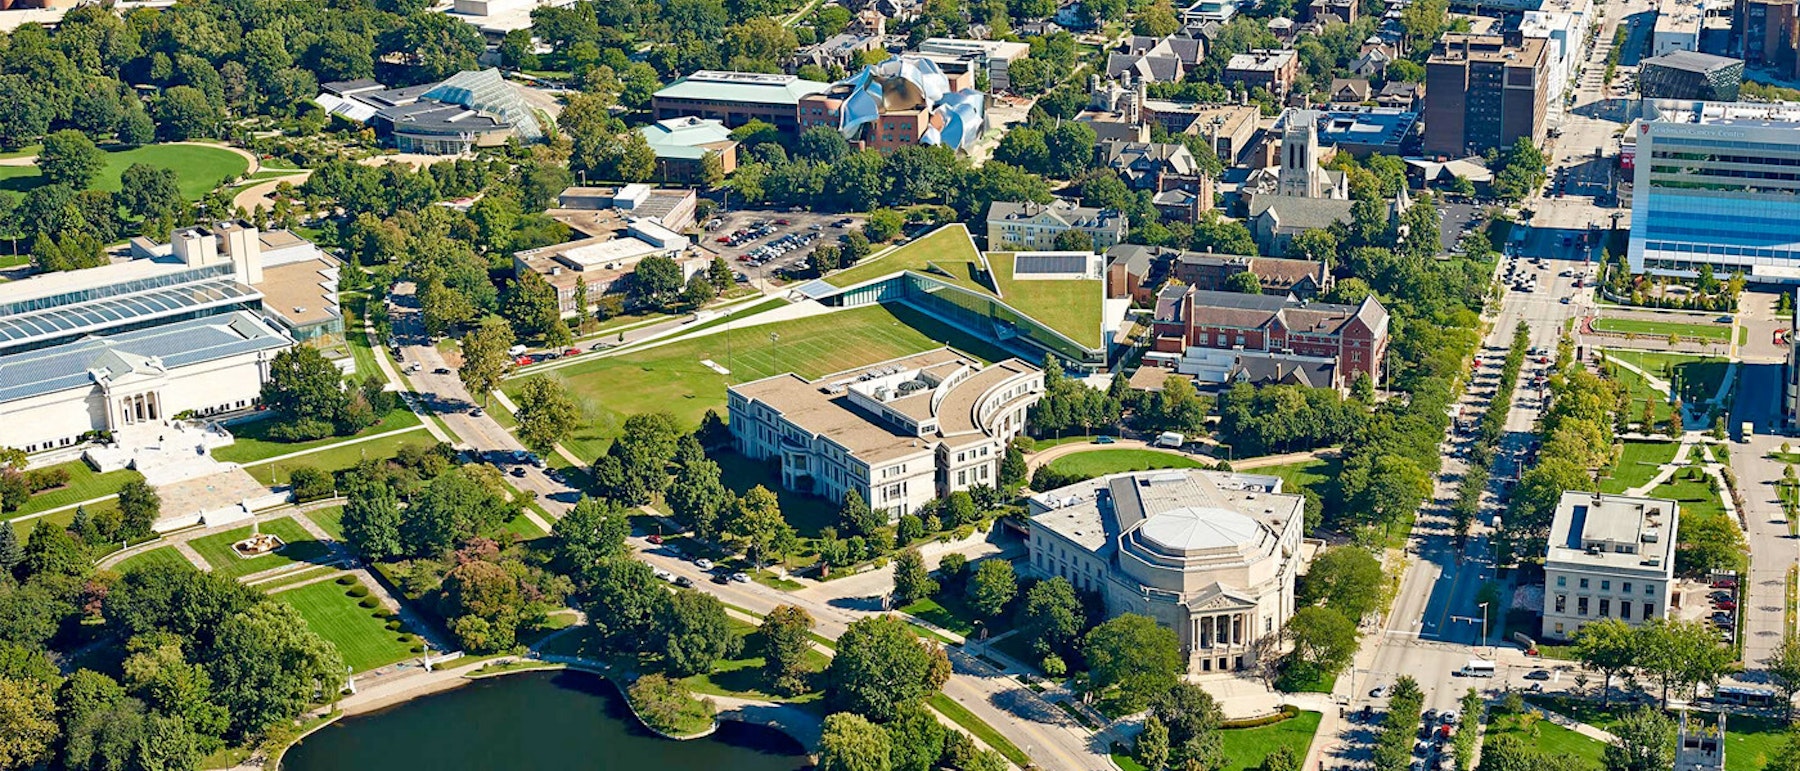 An aerial view of the CWRU campus